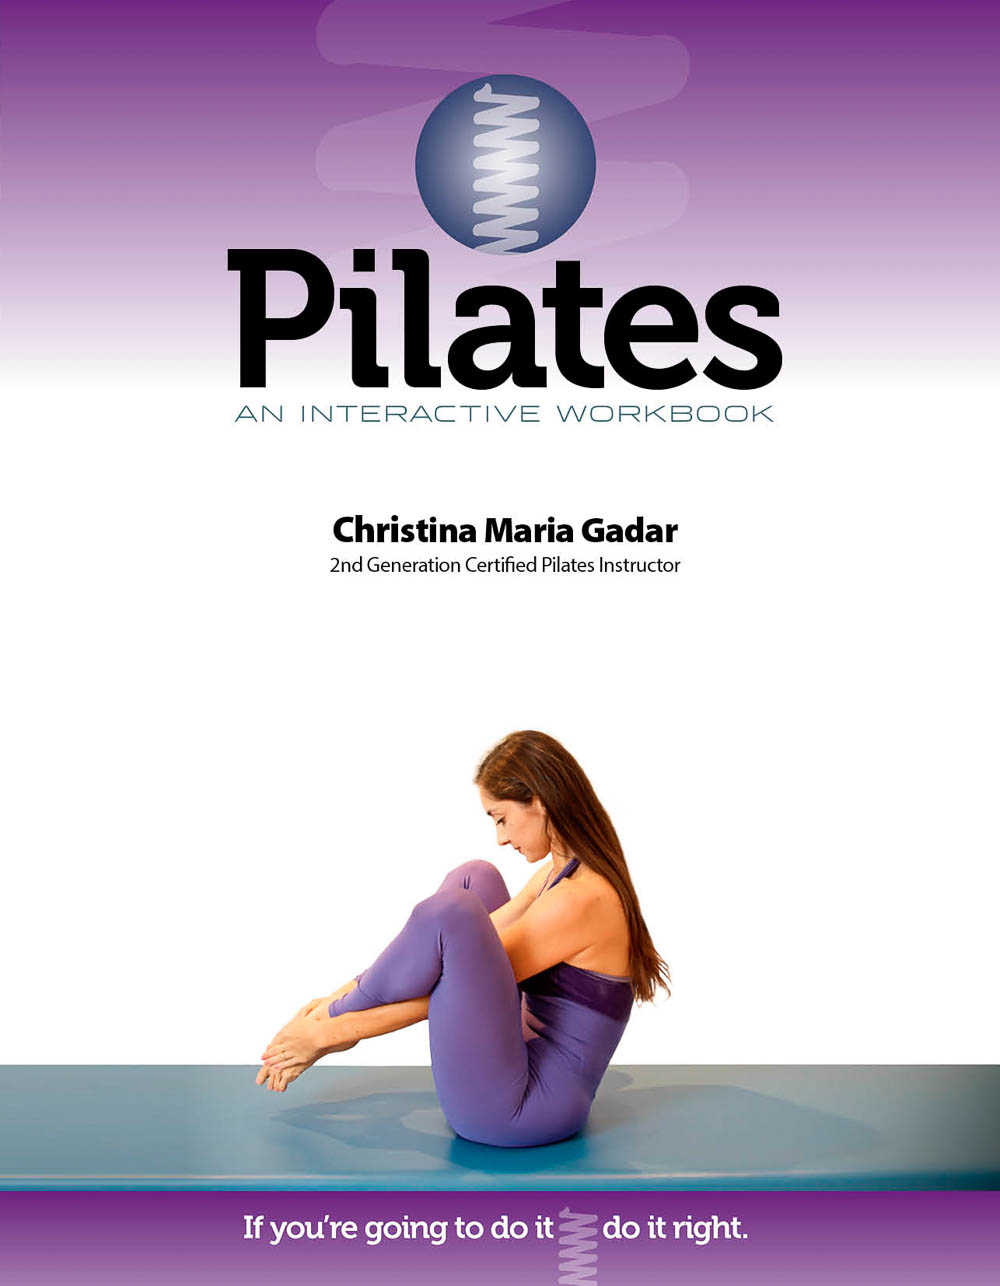 Thanks Order of the Pilates Exercises: Transitions on the Mat 4 - Pilates  Andrea